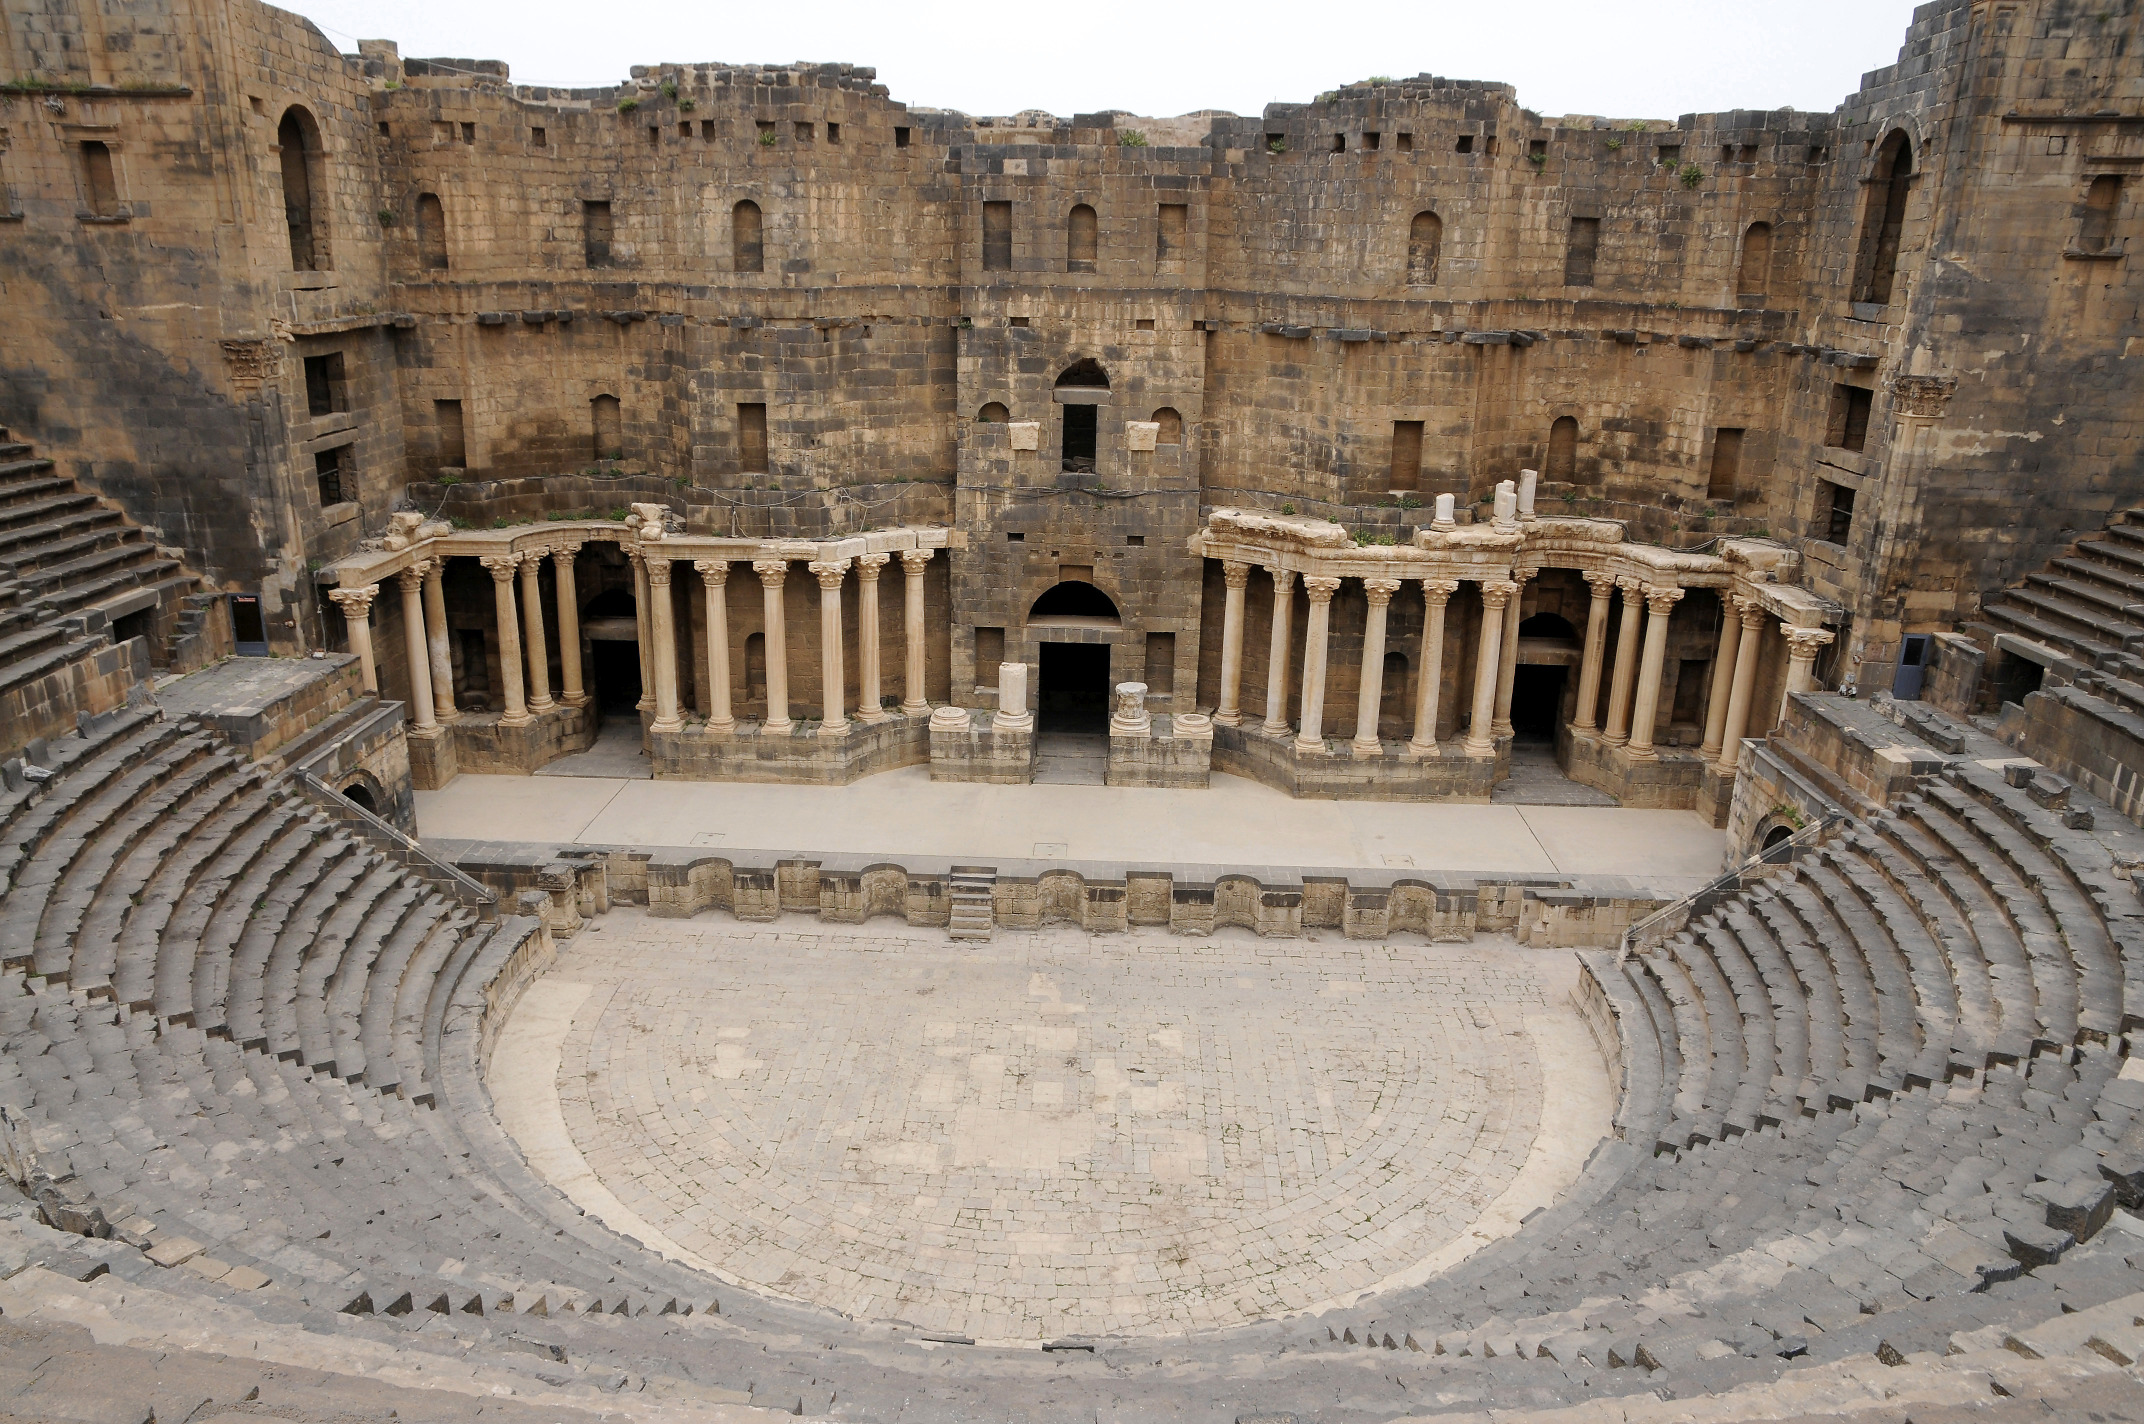 Roman theatre at Bosra (6) | Bosra | Pictures | Syria in Global ...